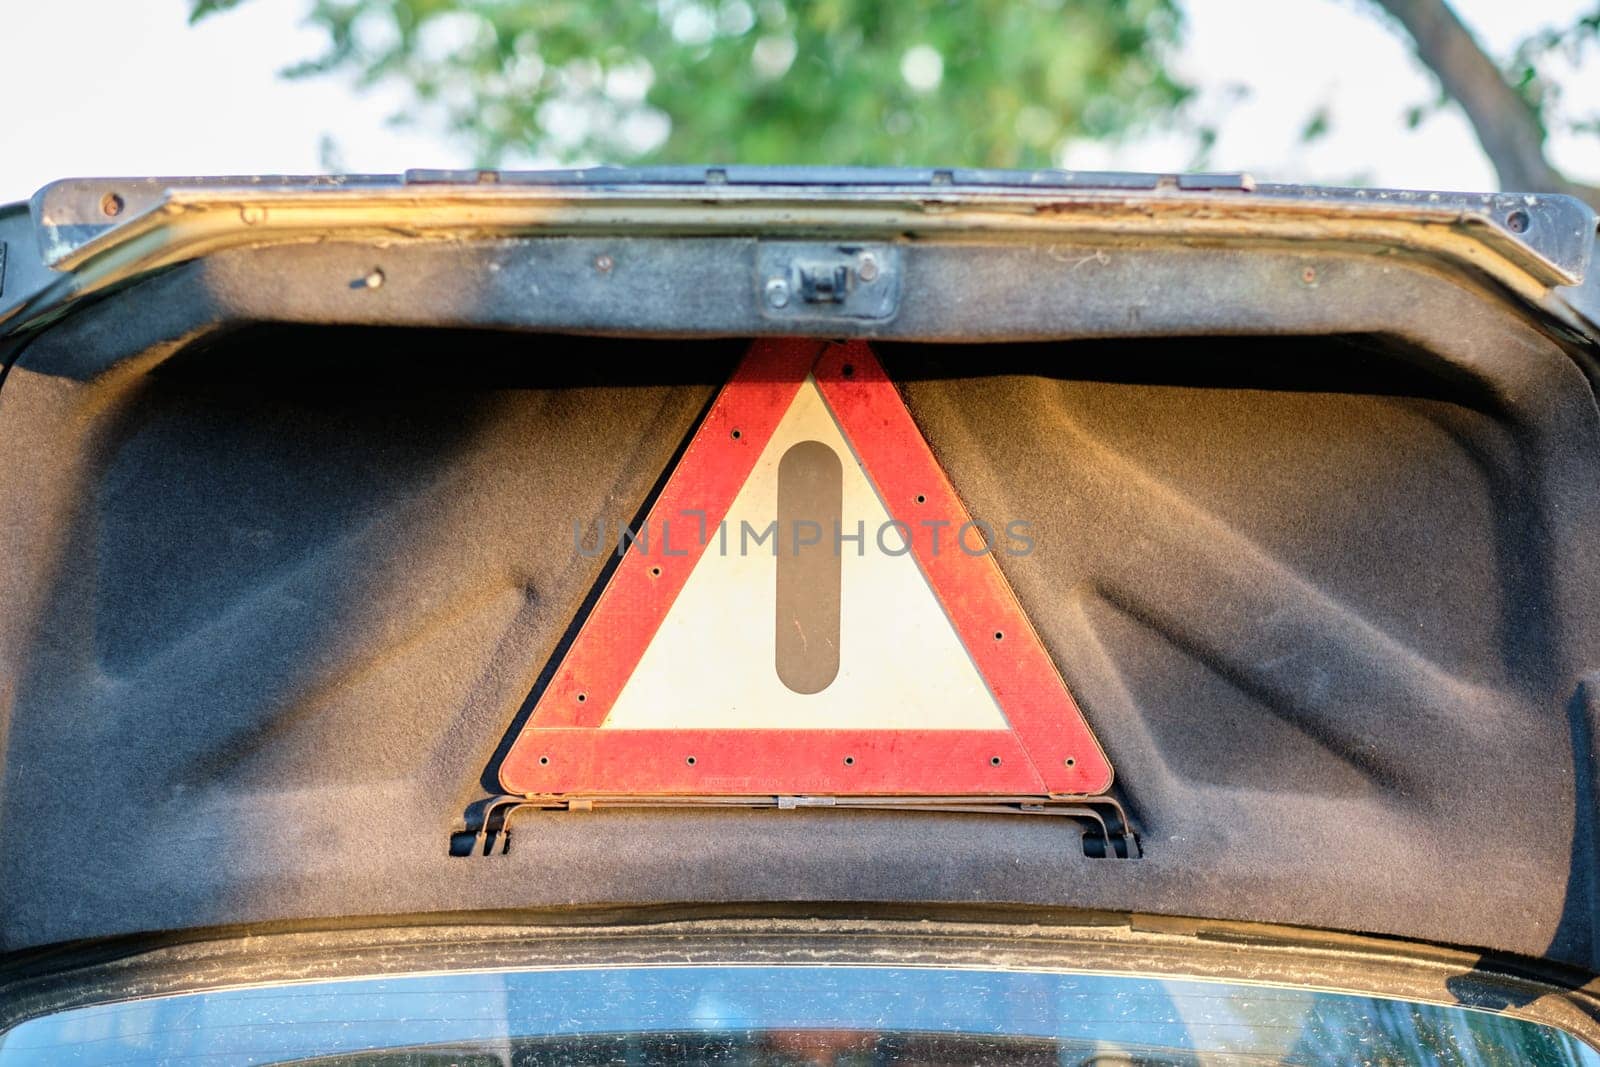 The danger warning sign on the lid of an old car. The concept of replacing a car with a safe one